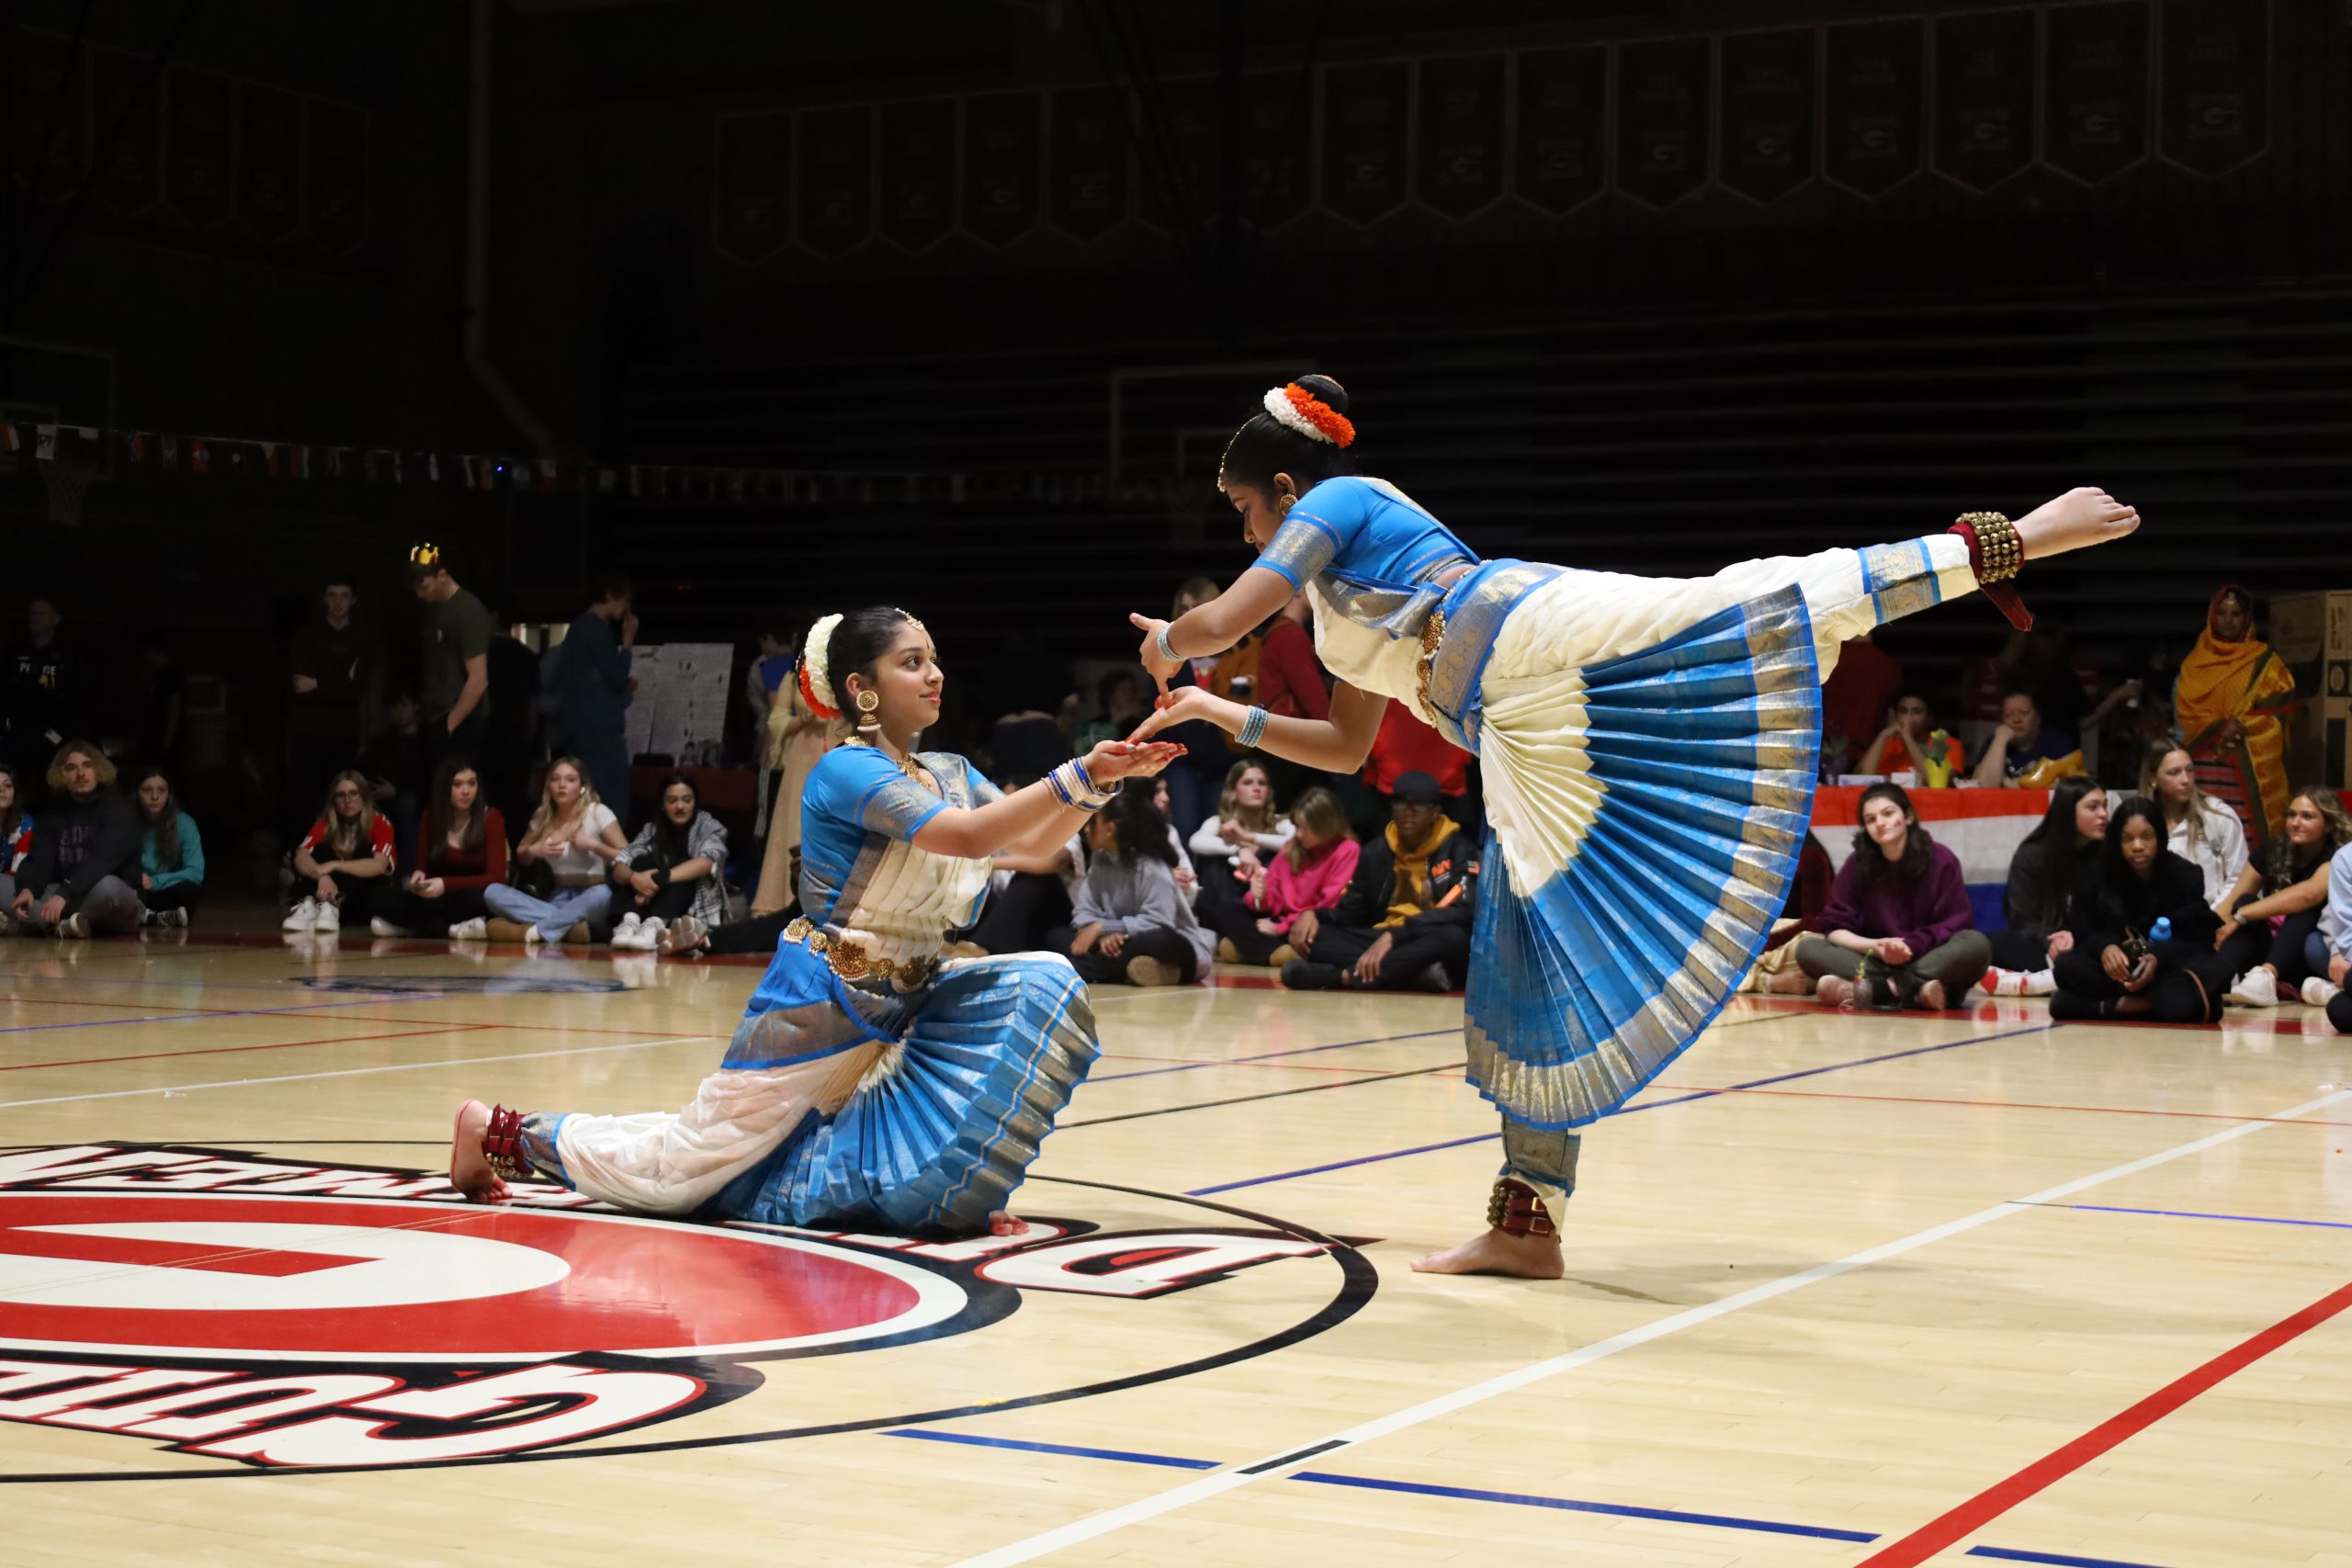 Two students are wearing traditional blue and white clothing. They are dancing. One is kneeling and the other is holding her hand, with her leg extended. They are barefoot.